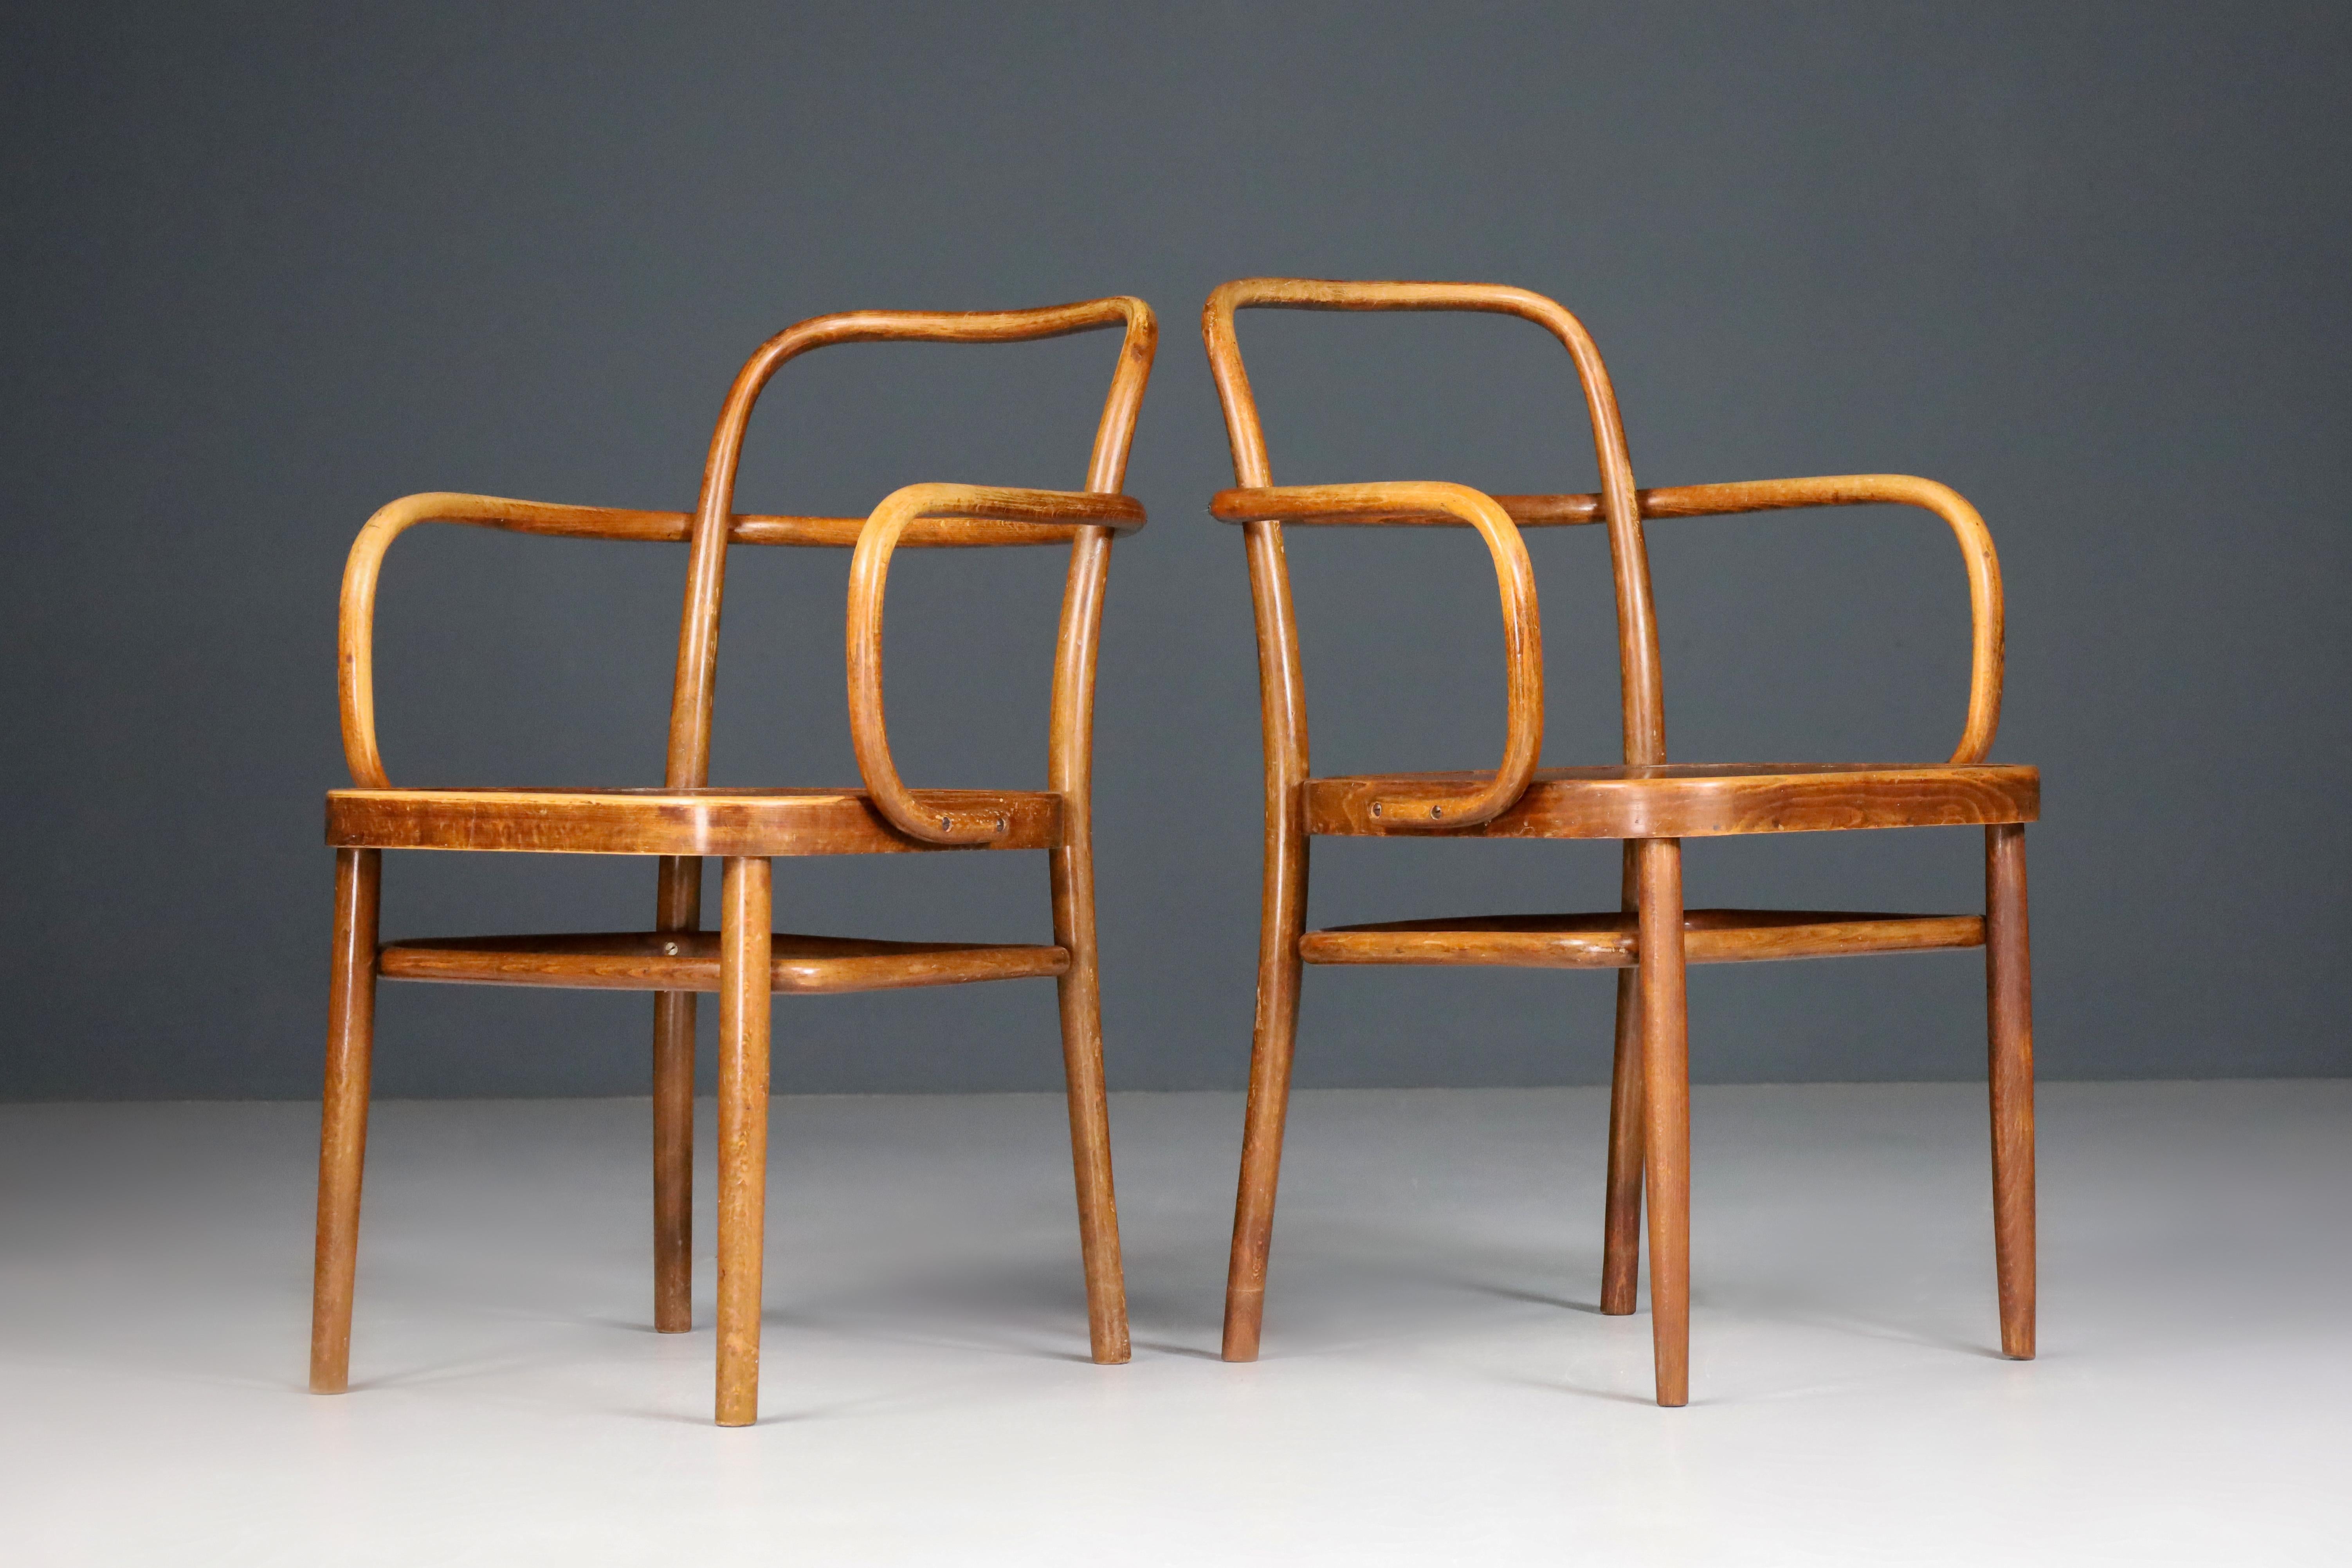 Armchairs by Adolf Gustav Schneck No. A 64 F Austria 1927.

Beech bentwood armchairs model No. A 64 F was designed by Gustav Adolf Schneck and made by Thonet in the late 1920s. These armchairs are in excellent original condition with a fantastic